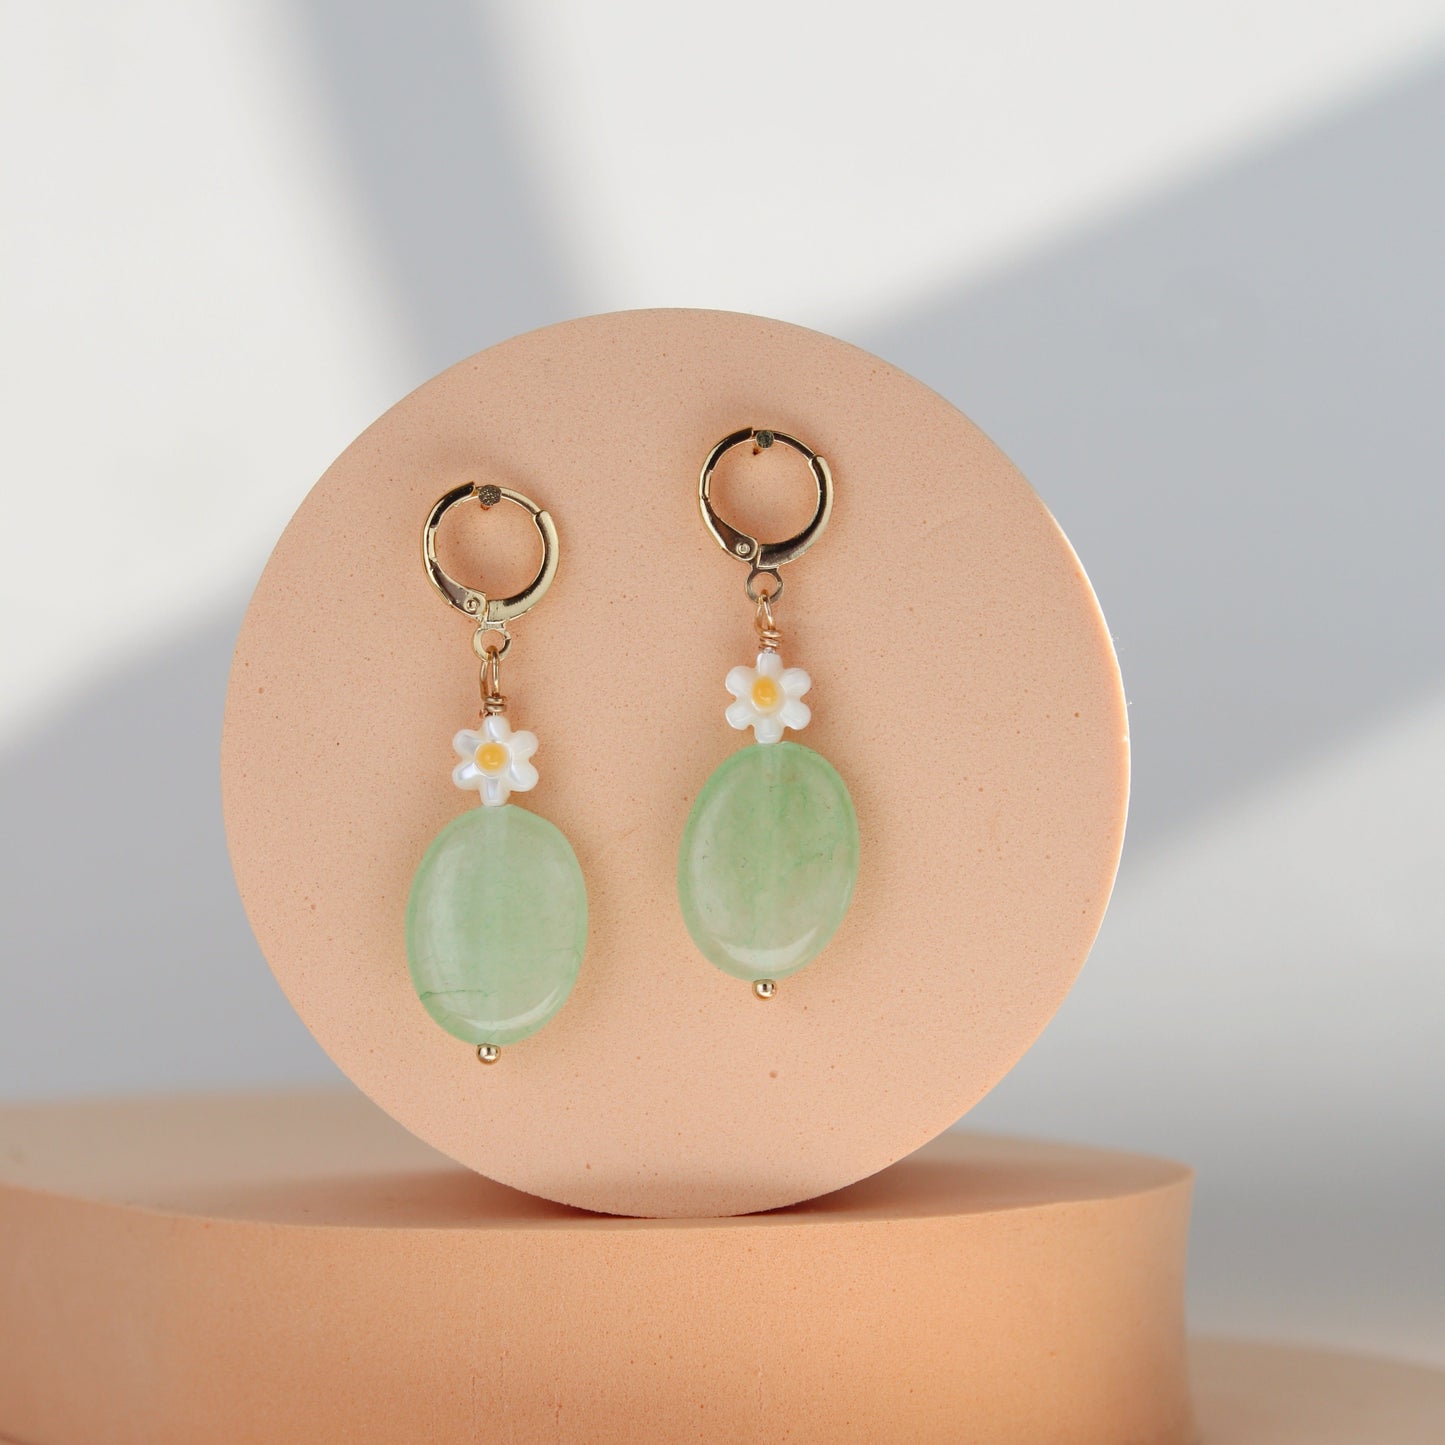 Daisy flower earring with green glass beads on gold plated hoop earring | Summer Nikole Jewelry